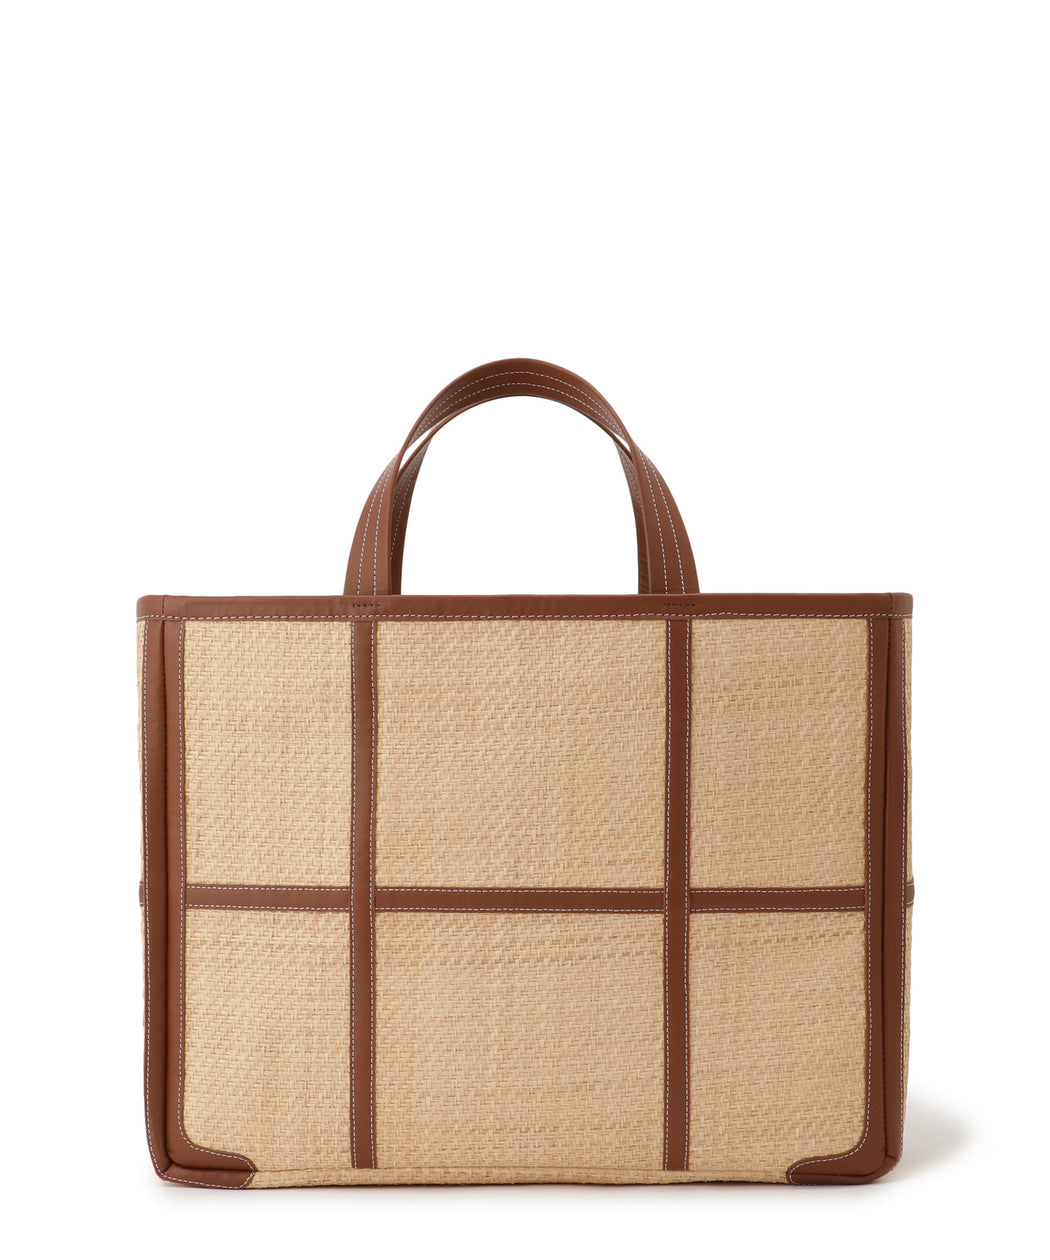 Wide leather-trimmed tote bag